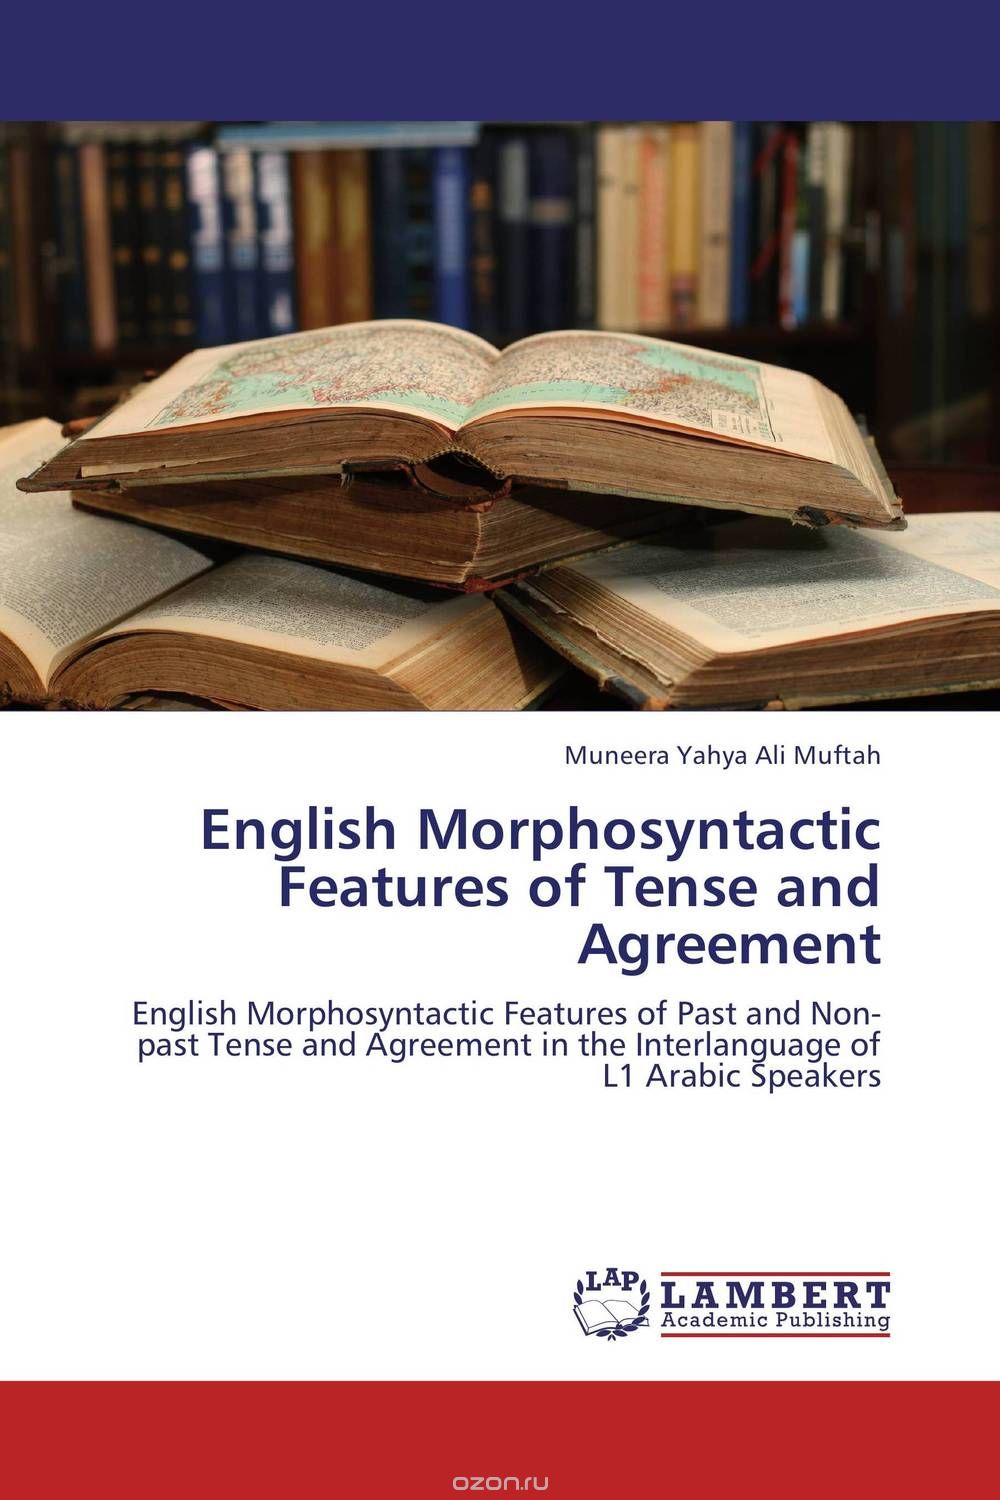 English Morphosyntactic Features of Tense and Agreement